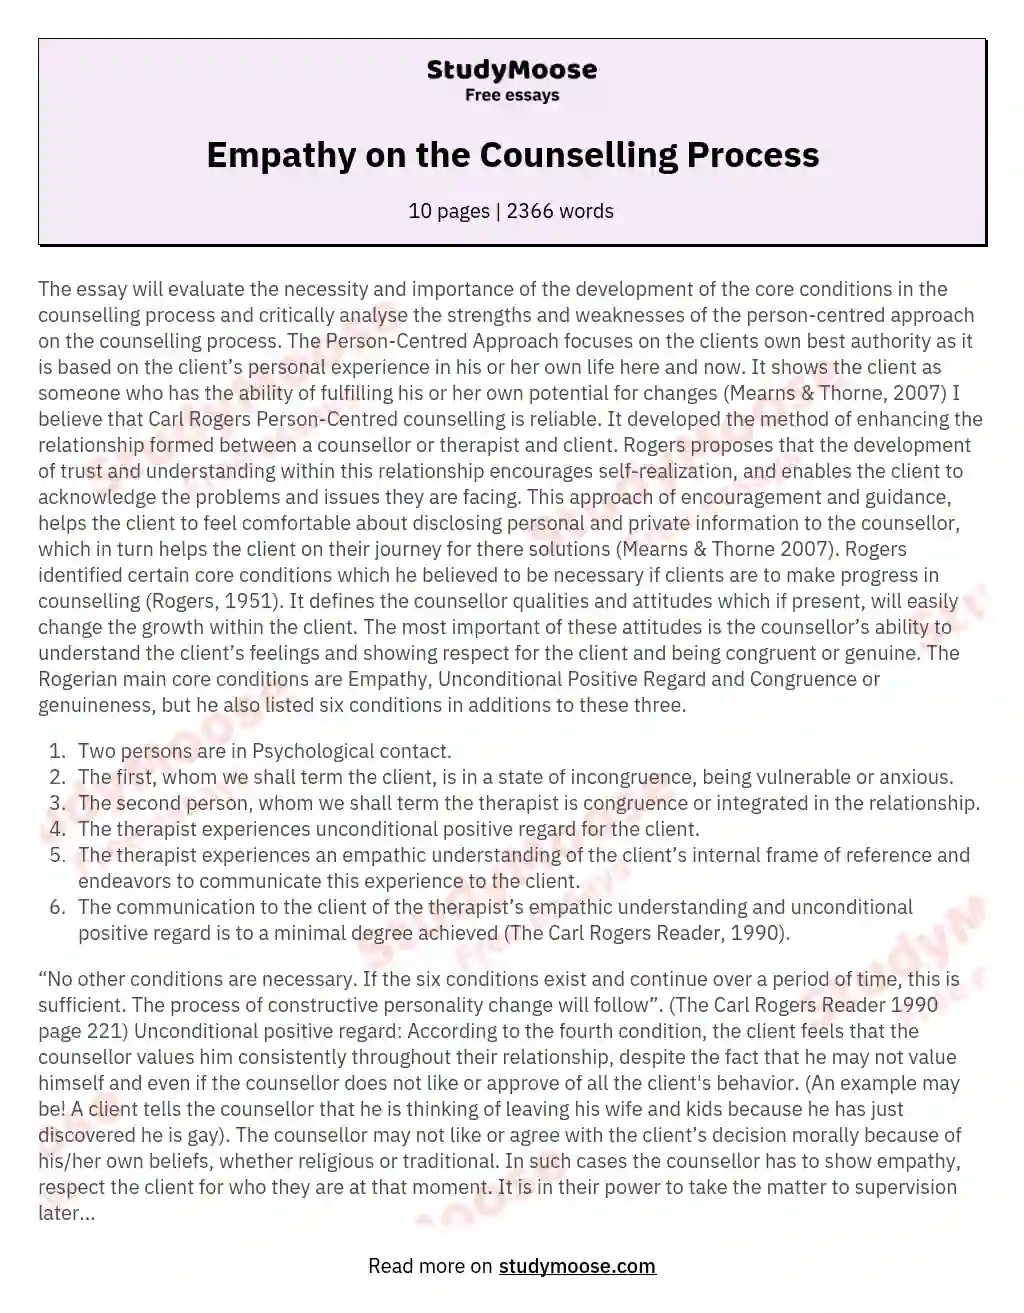 Empathy on the Counselling Process essay